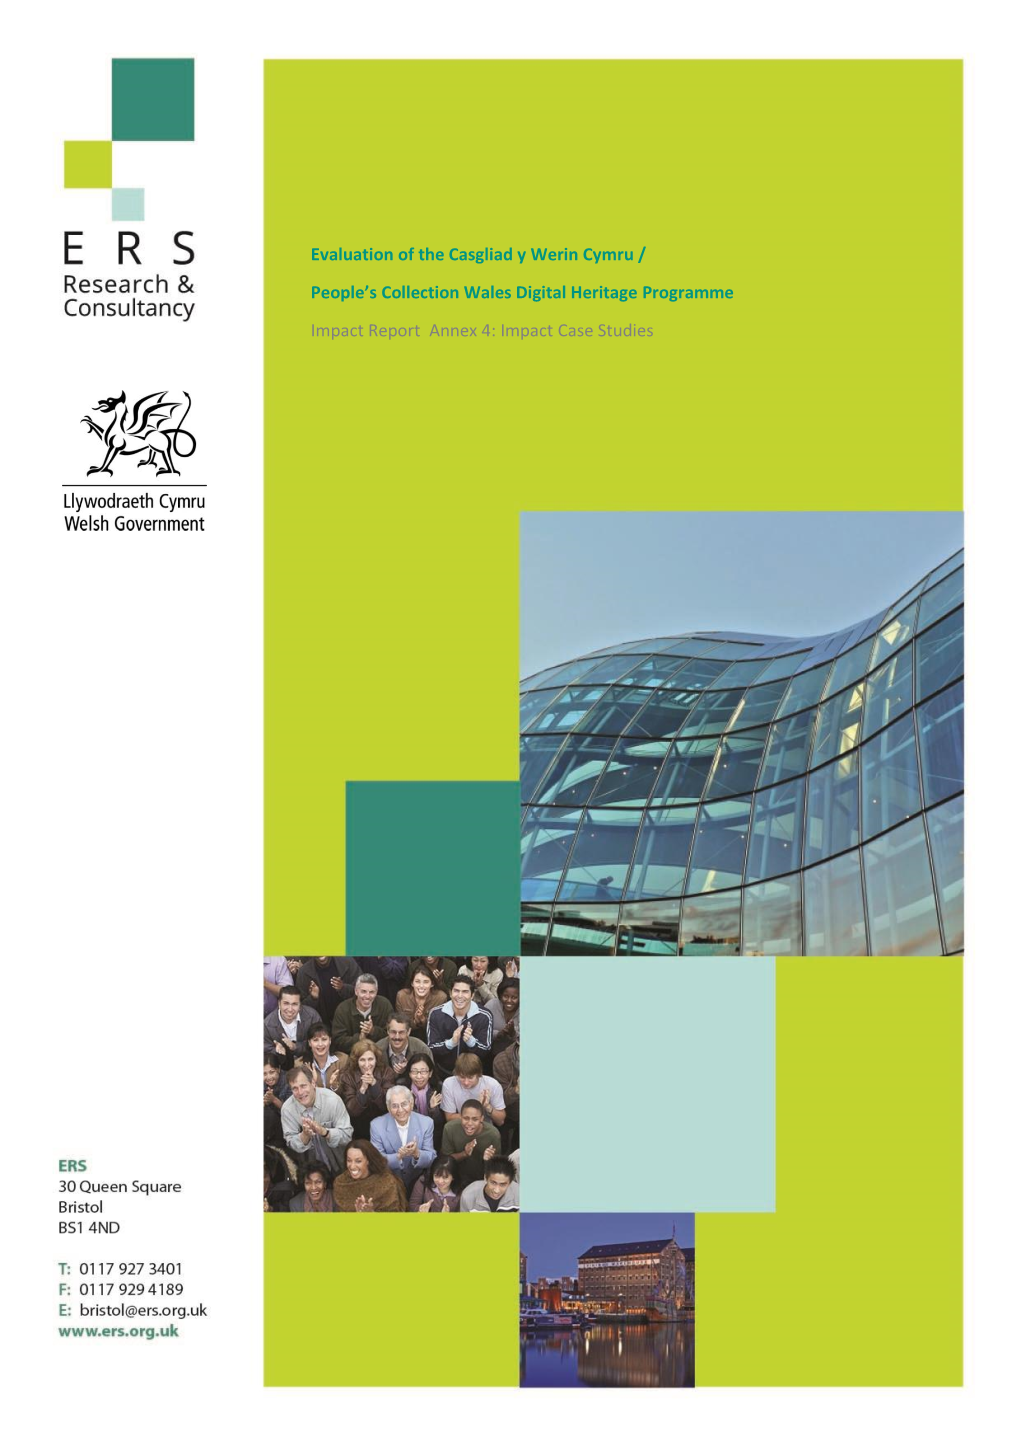 Evaluation of the People's Collection Wales Digital Heritage Programme Impact Report Annex 4